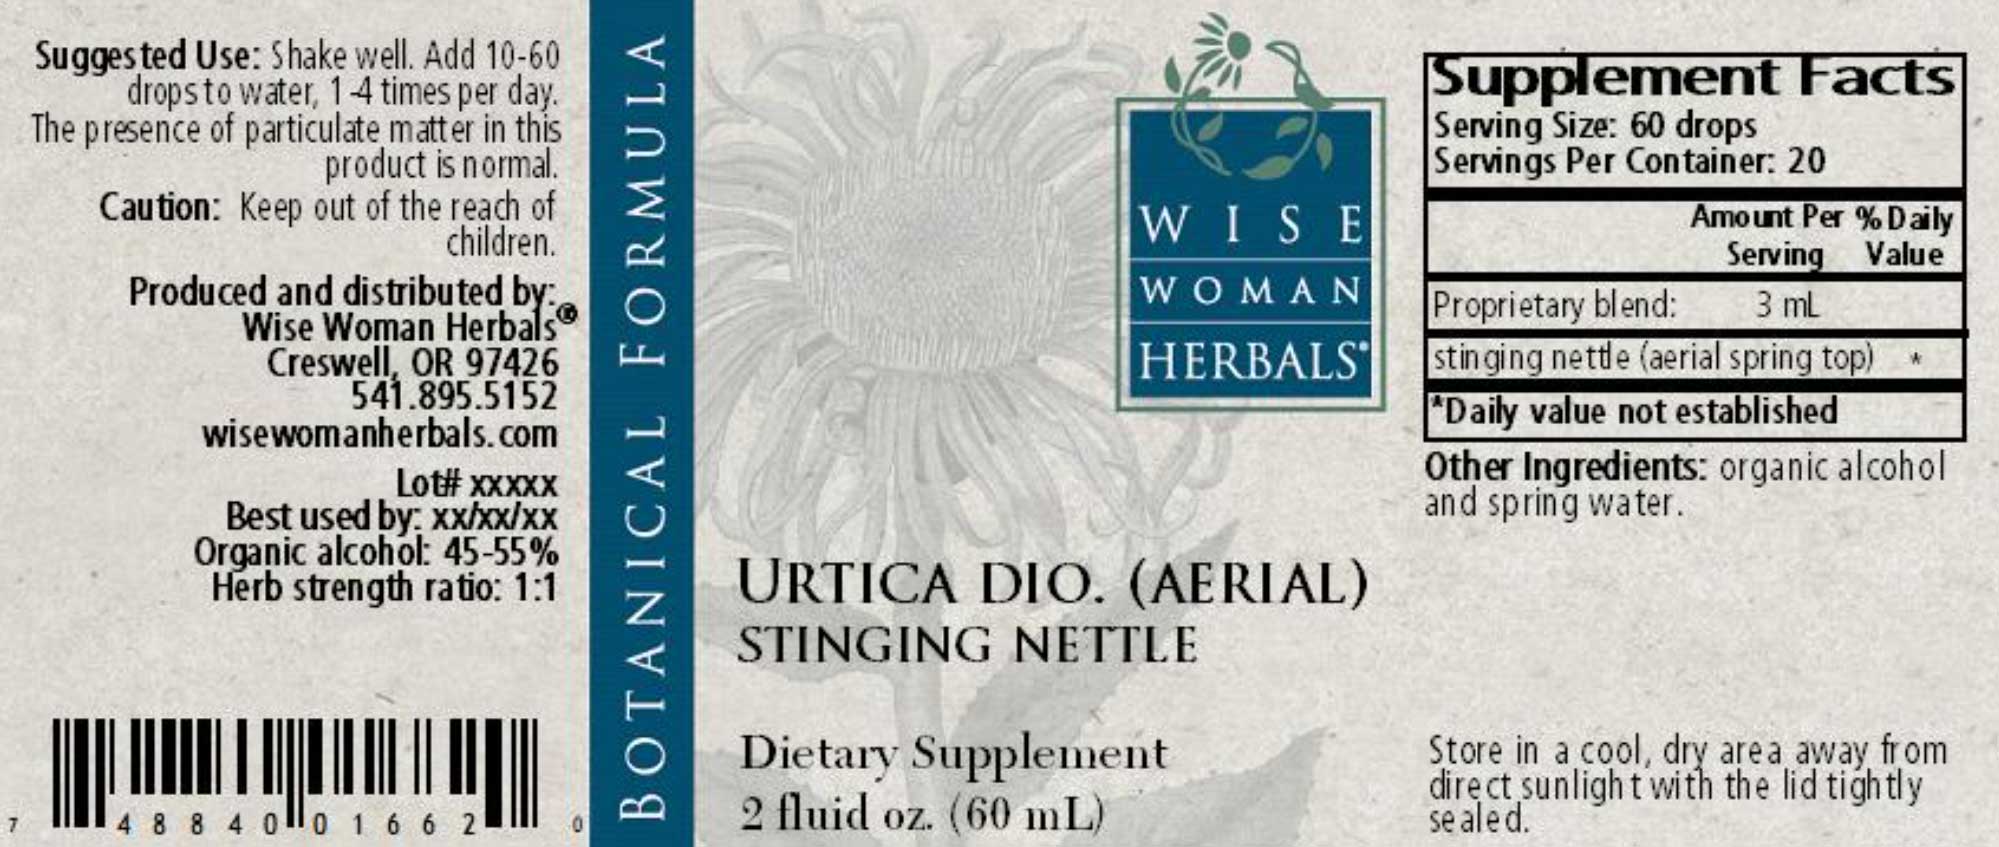 Wise Woman Herbals Urtica Dioica Stinging Nettle (Aerial) Label